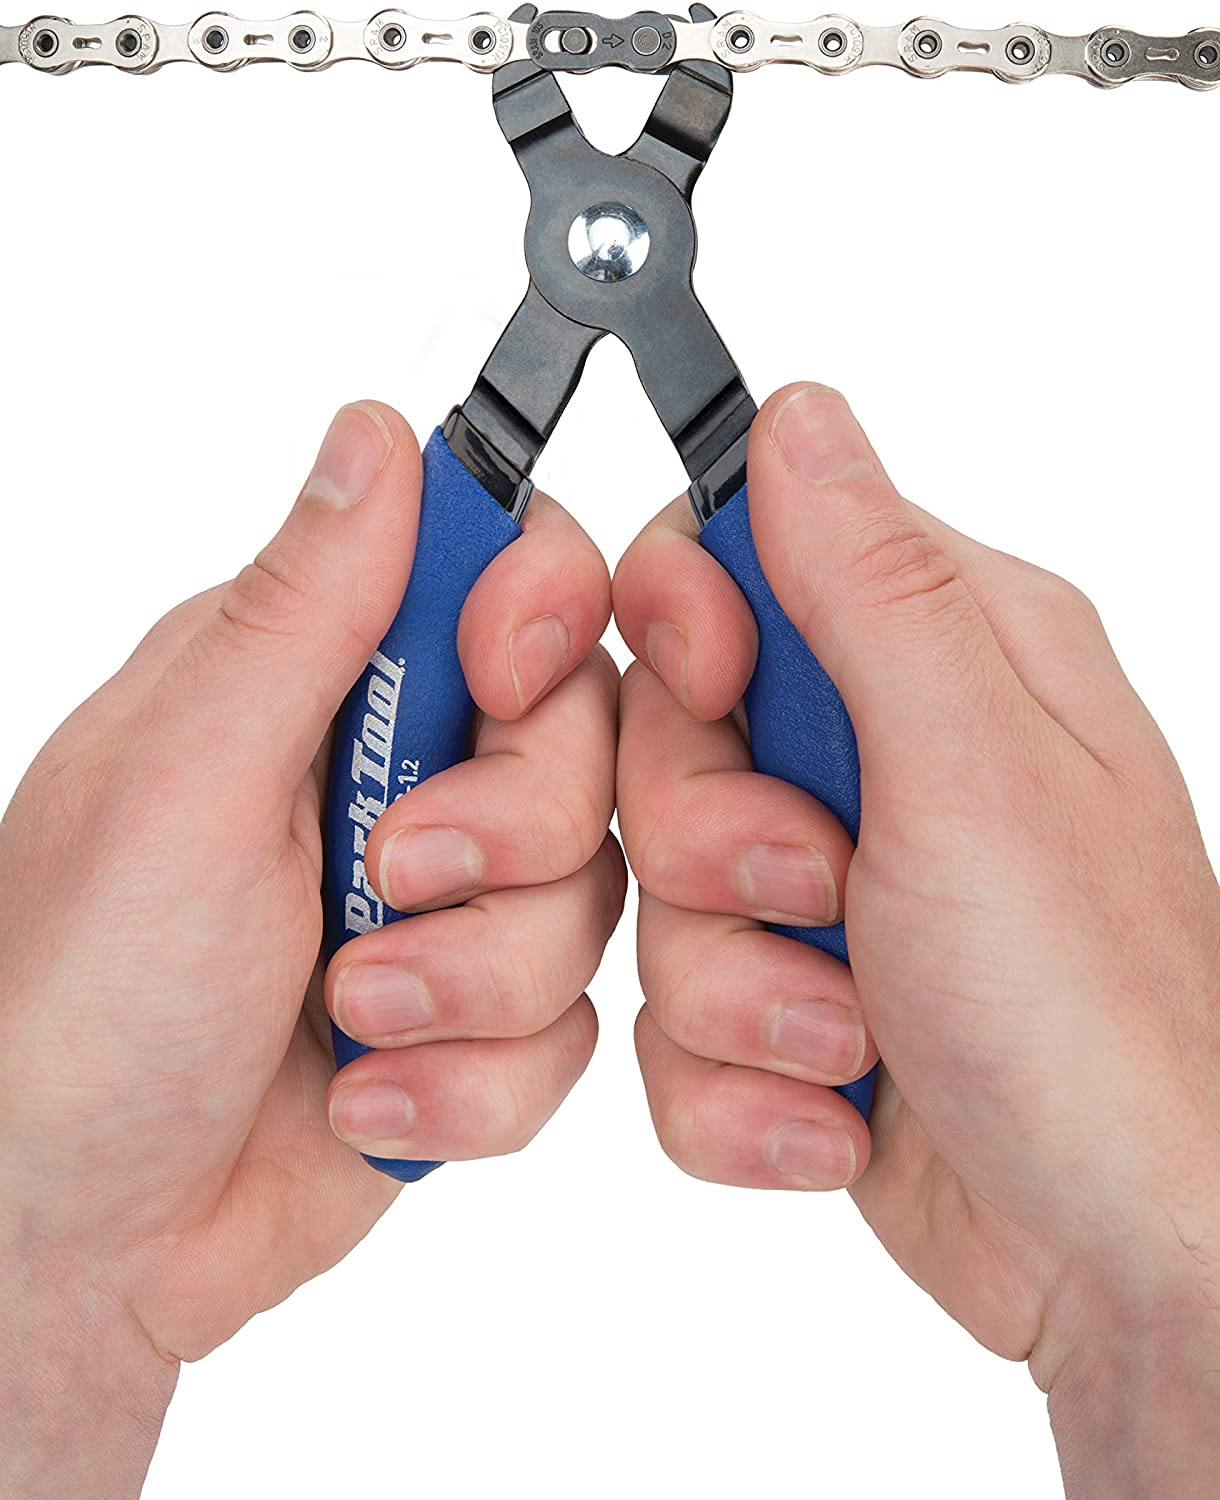 Once you have marked the correct length use master link pliers like these to split the chain.